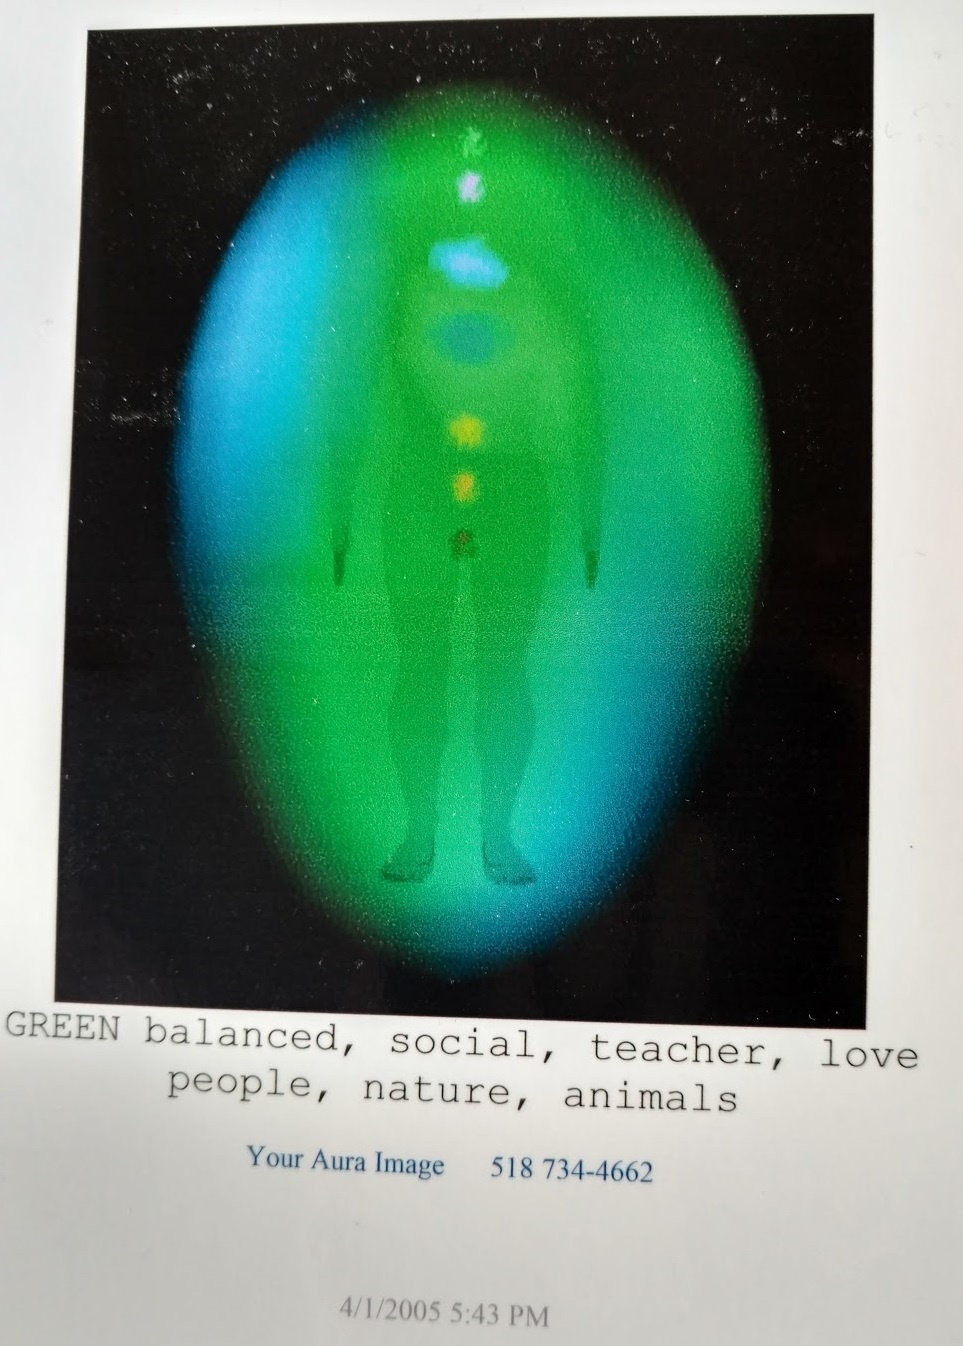 Tammy's Kirlian photograph taken at a Intuitive PhD healer Carolyn Myss conference in NYC.  Carolyn Myss wrote the book "Sacred Contracts" which Tammy made sure I had a copy of -- one of the few book's Tammy has bought for me.  The Photographer remarked on the size of Tammy's heart chakra "it's twice the size of everyone else's"..   Juan (retired IBM) Shaman practicing in Tucson Arizona told Tammy that her aura was "the size of a house" and that she should learn to pull it back in to protect herself and not let it get contaminated by others (e.g., me)...    Juan told me that my 2nd chakra was leaking energy and was wide open....   coincidentally...